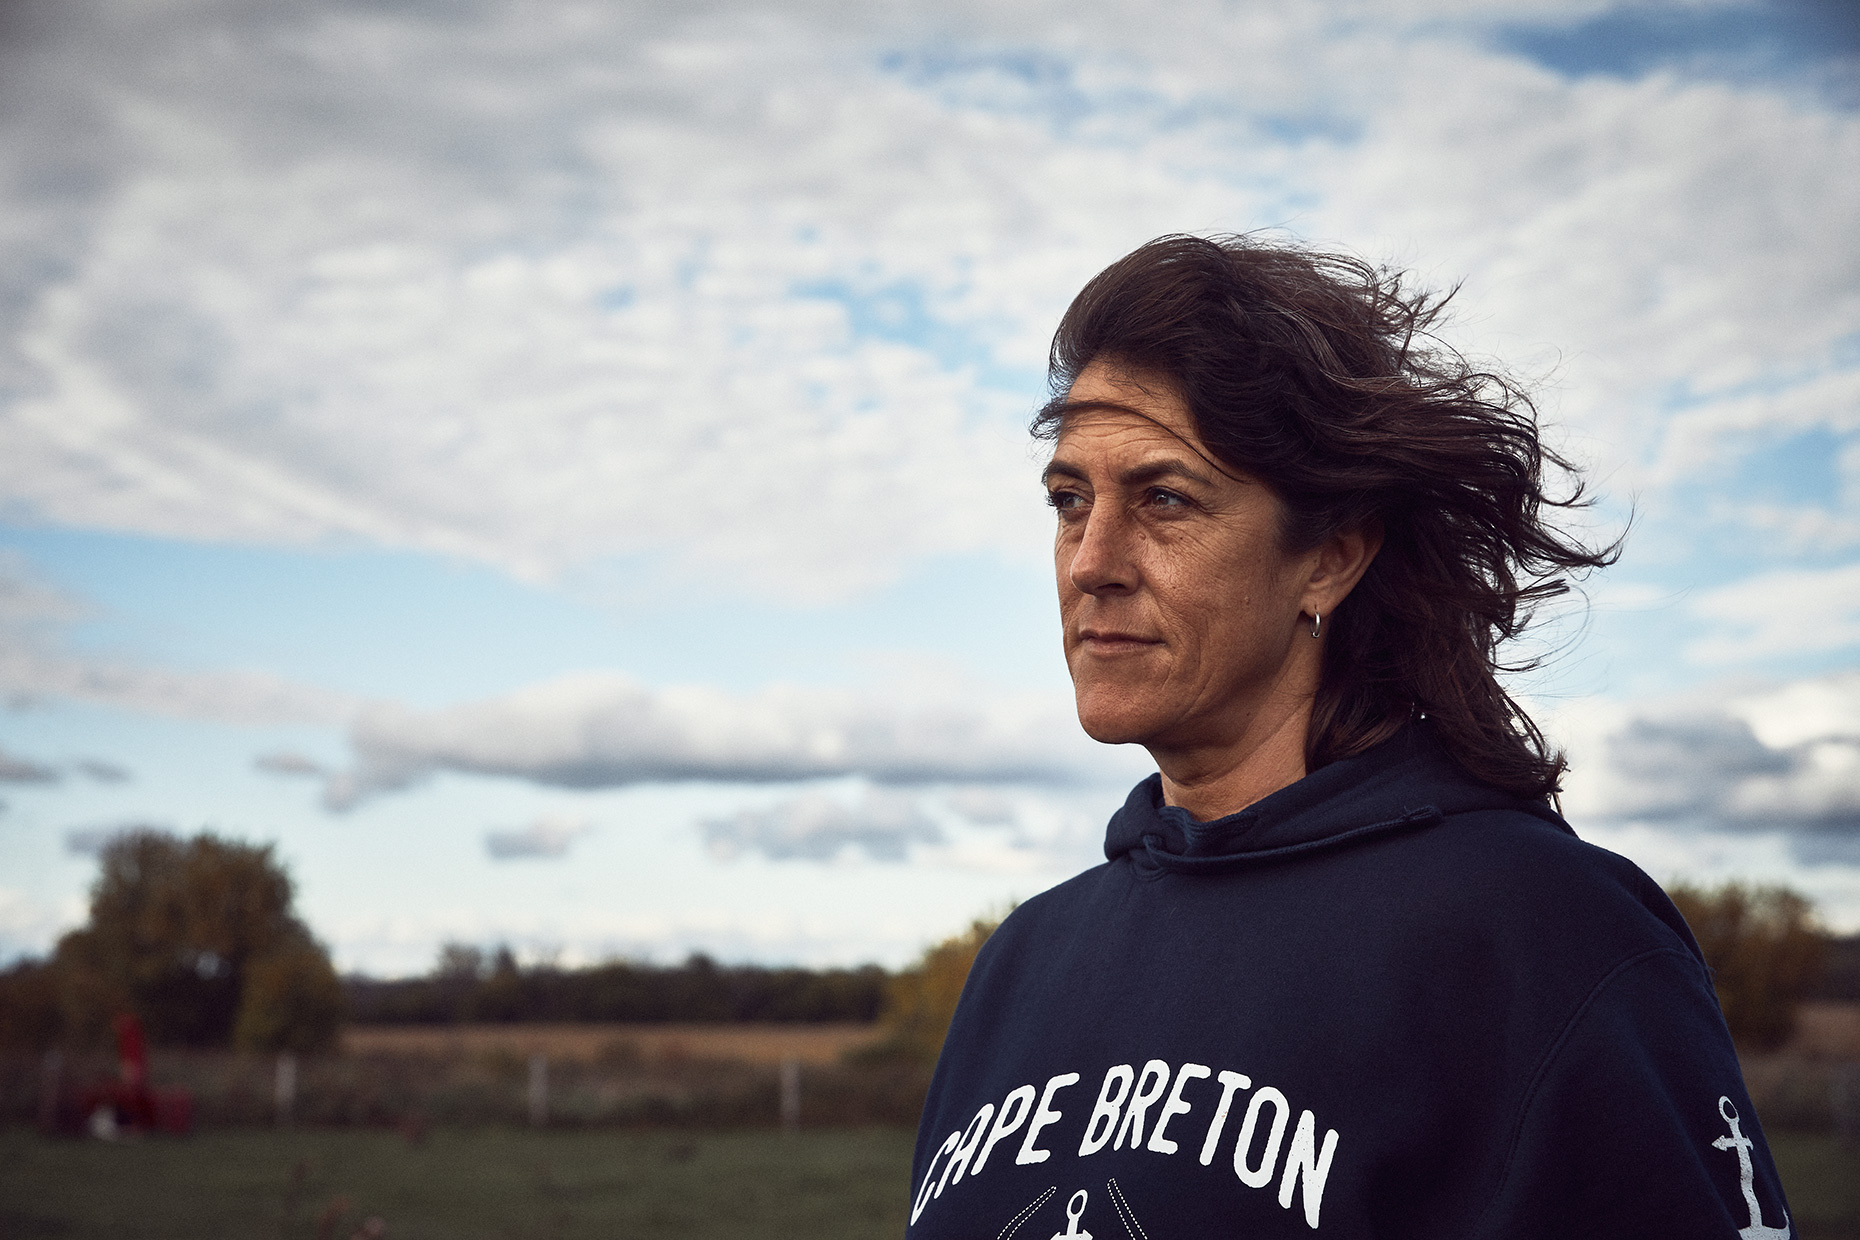 Ottawa editorial photographer, This is an editorial portrait taken by photographer Matthew Liteplo for Edible Ottawa Magazine. Matthew took this portrait in Kinsburn Ontraio, not far from his native Perth and Smiths falls. This is a portrait of a farmer who